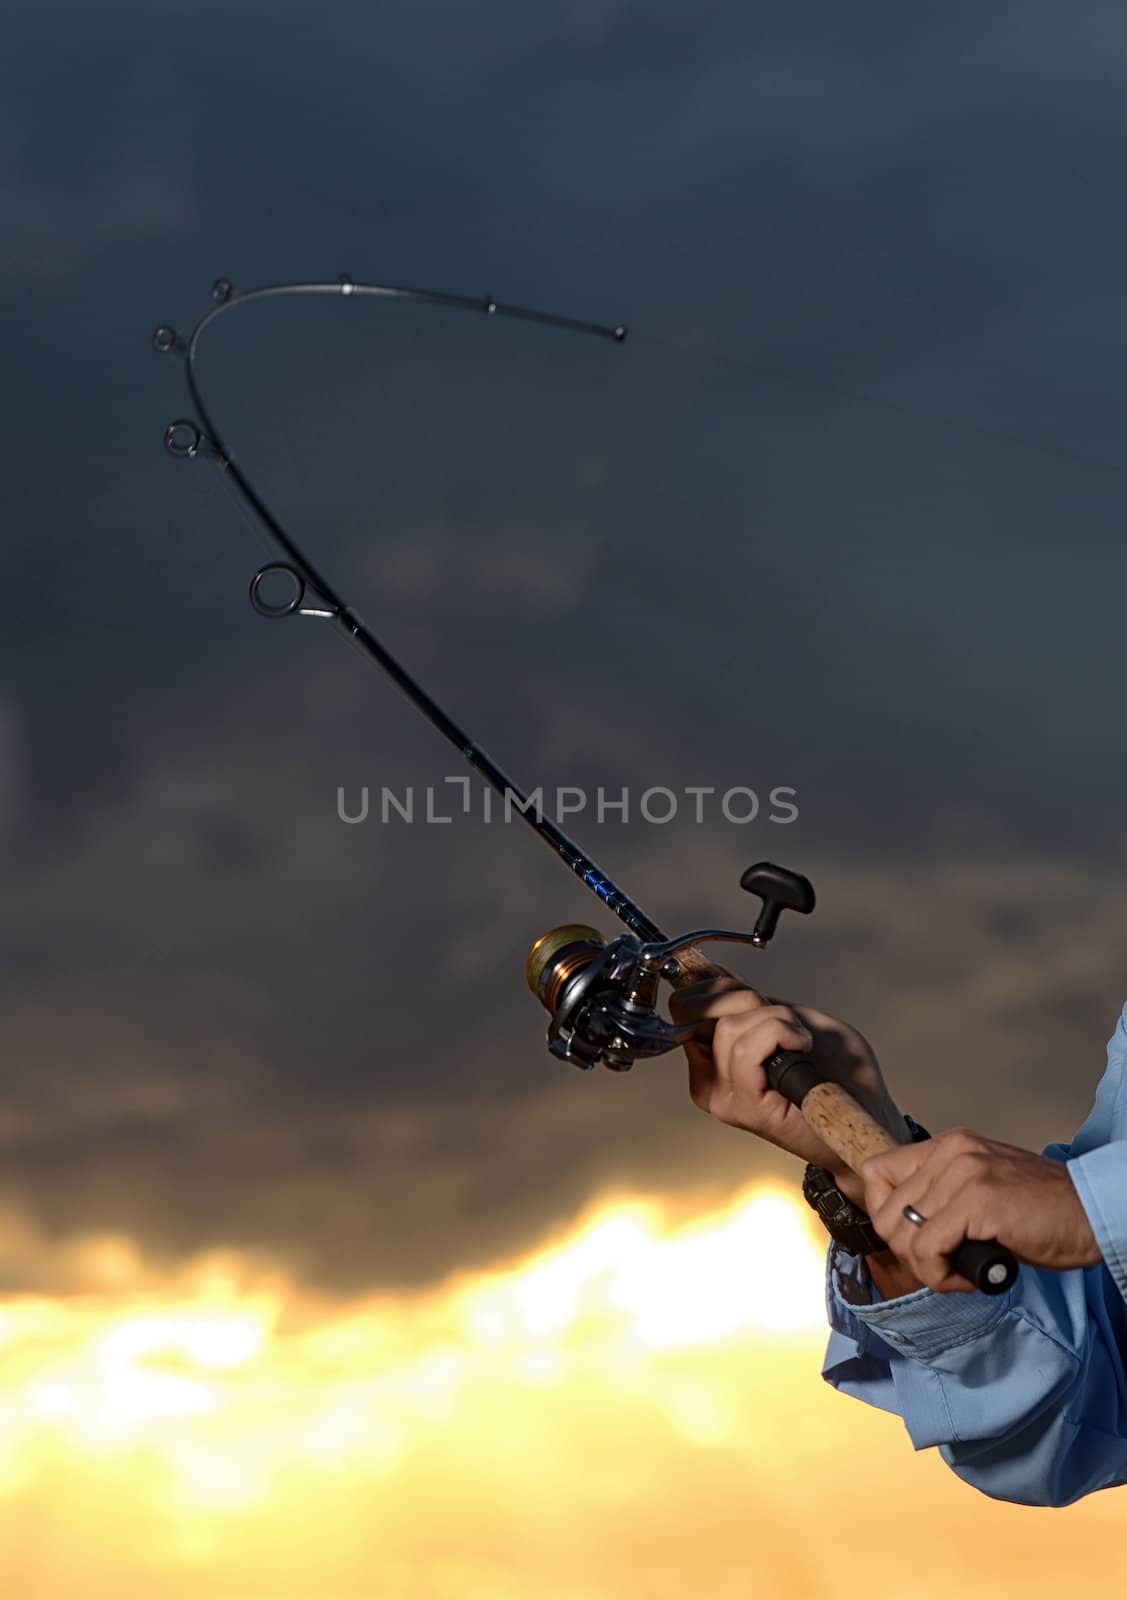 big catch while fishing with rod and reel by ftlaudgirl